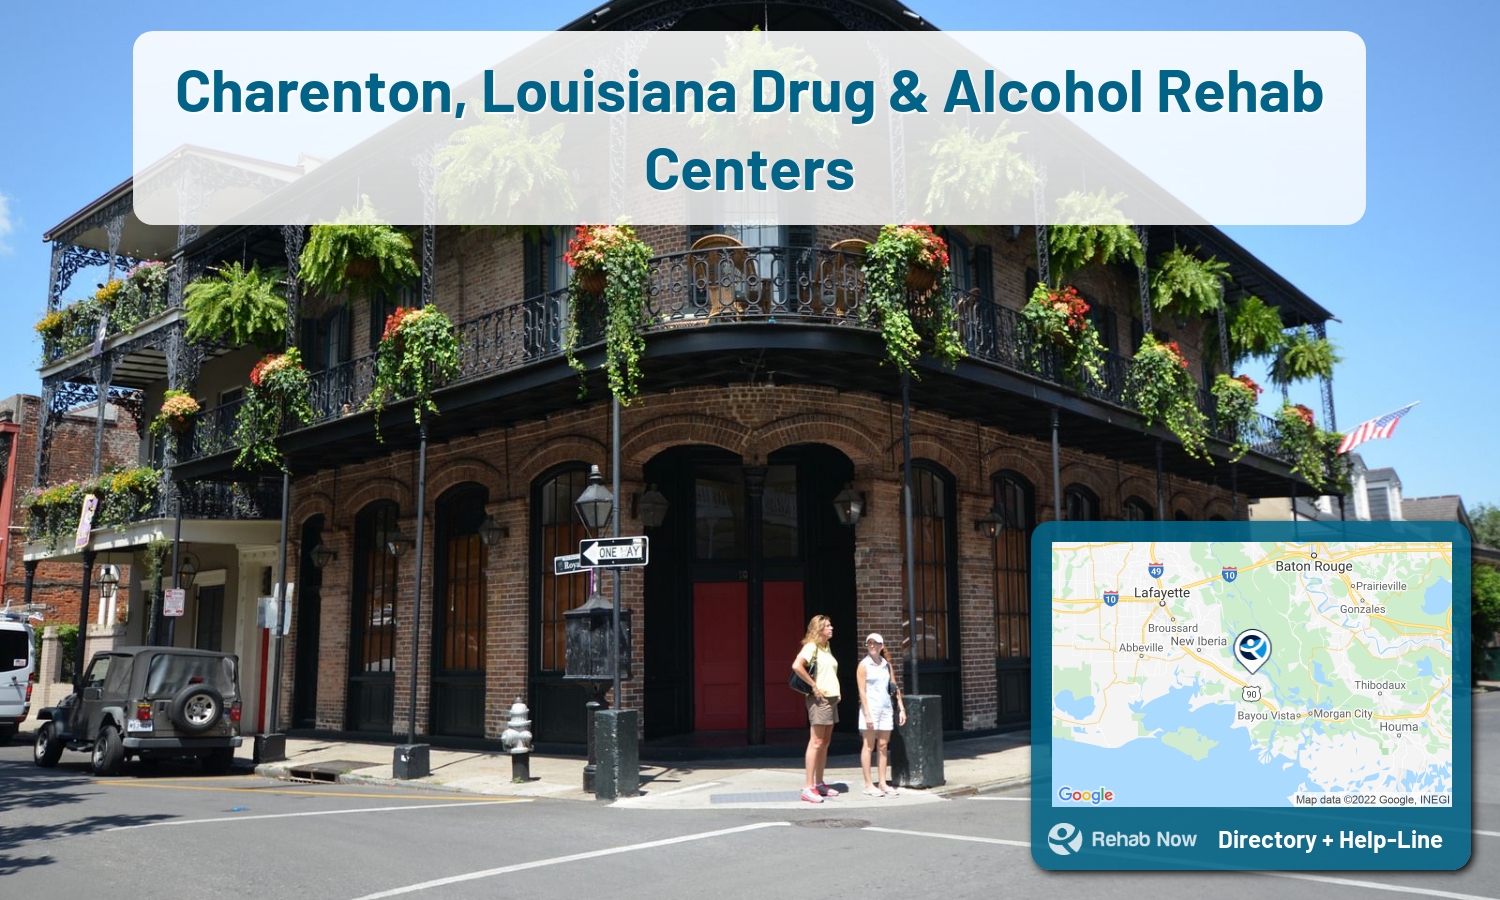 Charenton, LA Treatment Centers. Find drug rehab in Charenton, Louisiana, or detox and treatment programs. Get the right help now!